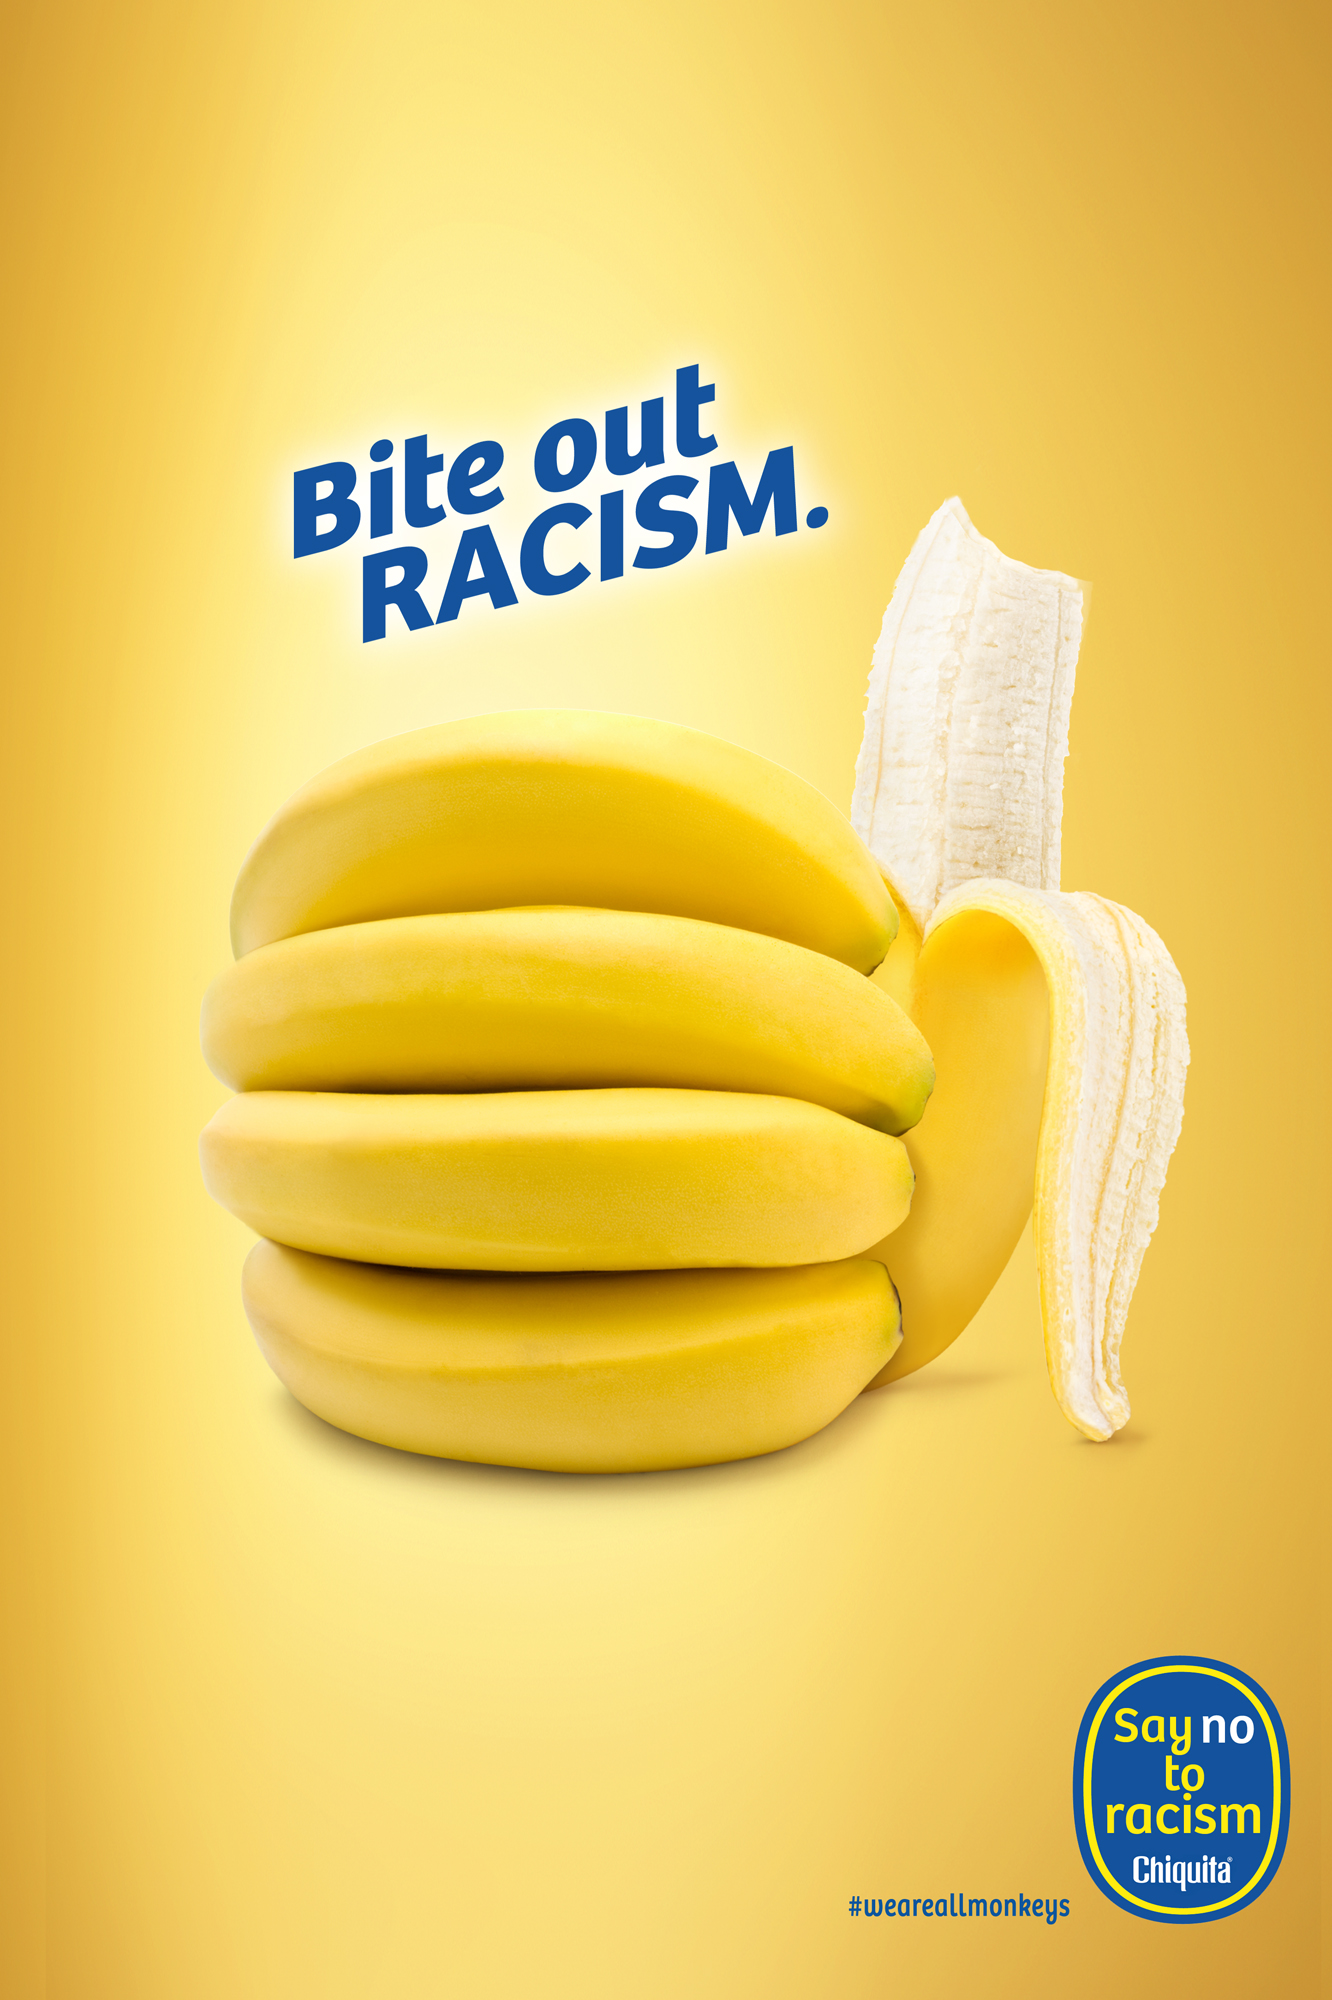 BITE OUT RACISM – SAY NO TO RACISM